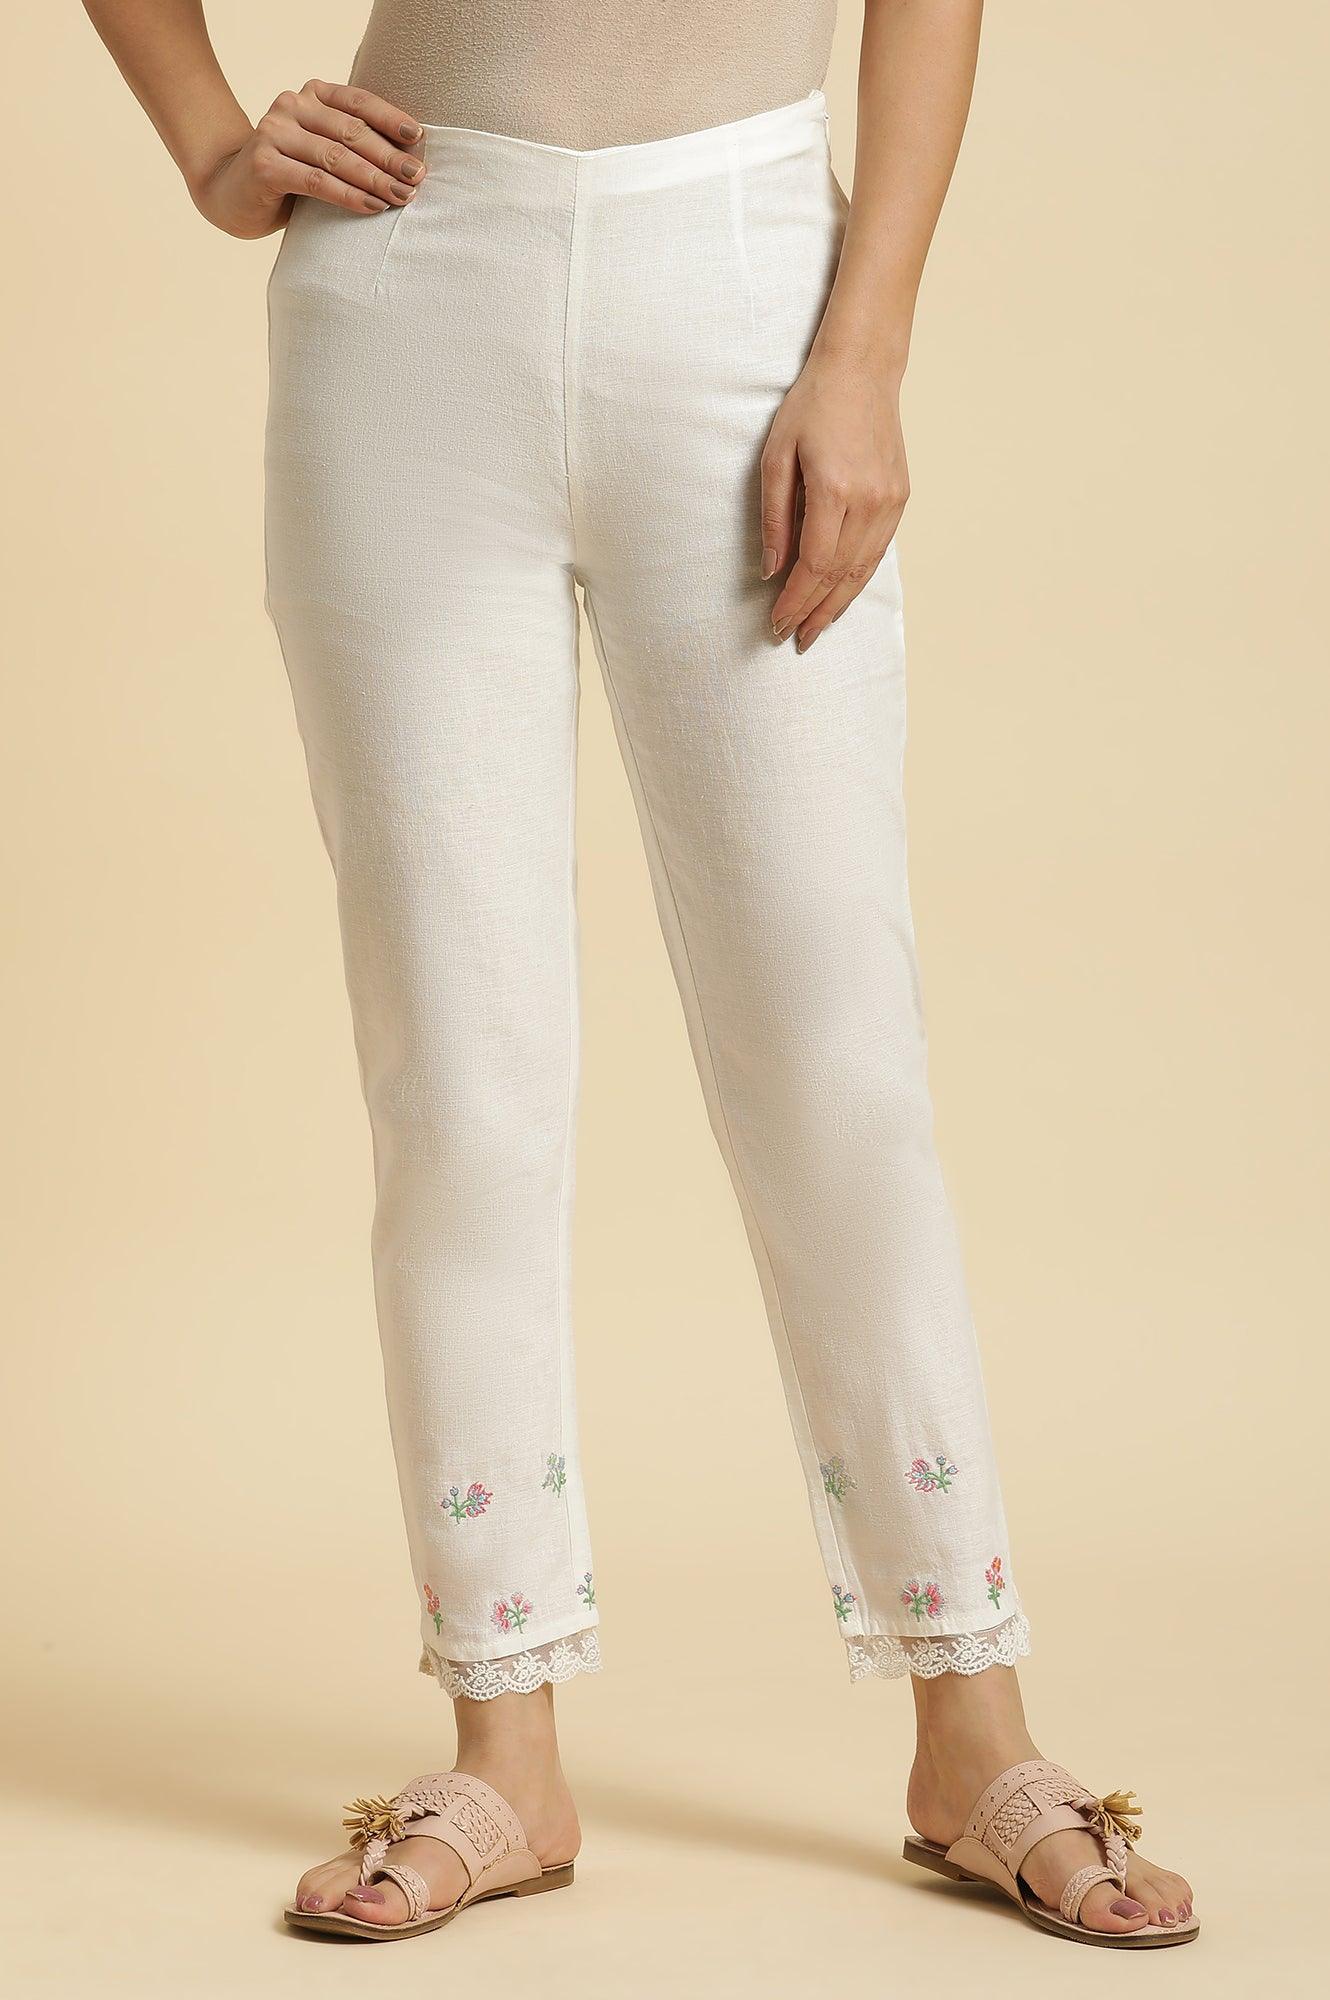 Ecru Slim Pants With Multi-Coloured Floral Embroidery - wforwoman